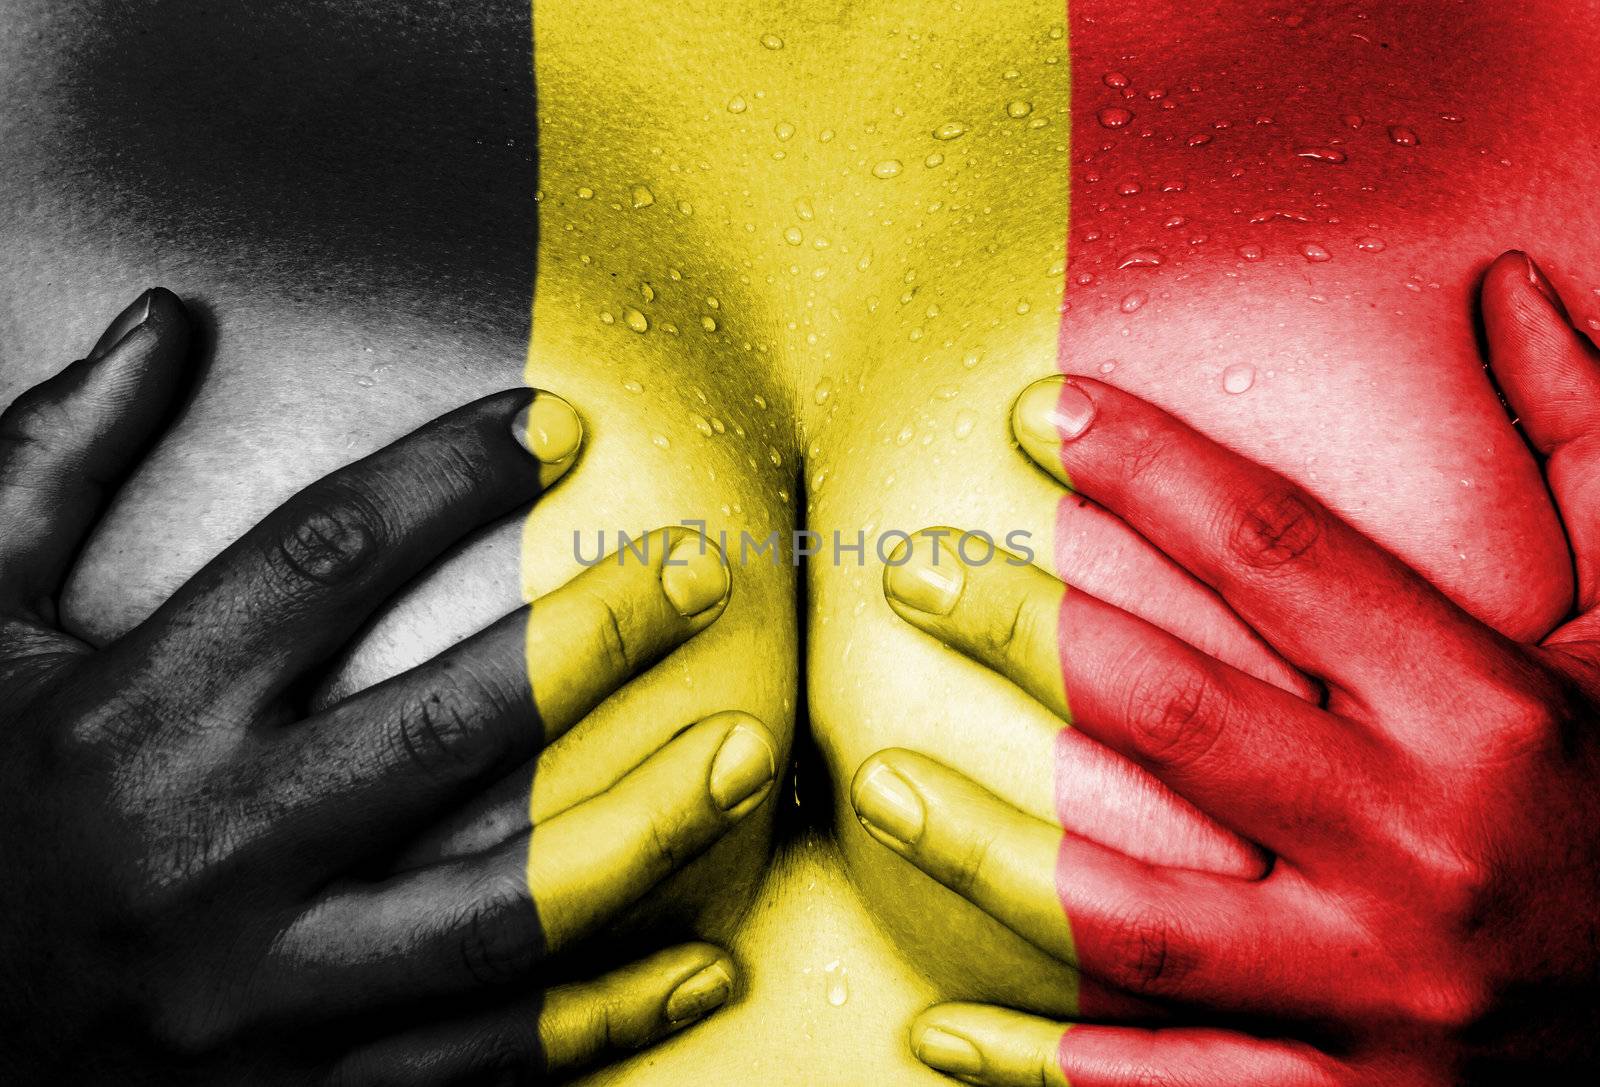 Sweaty upper part of female body, hands covering breasts, flag of Belgium